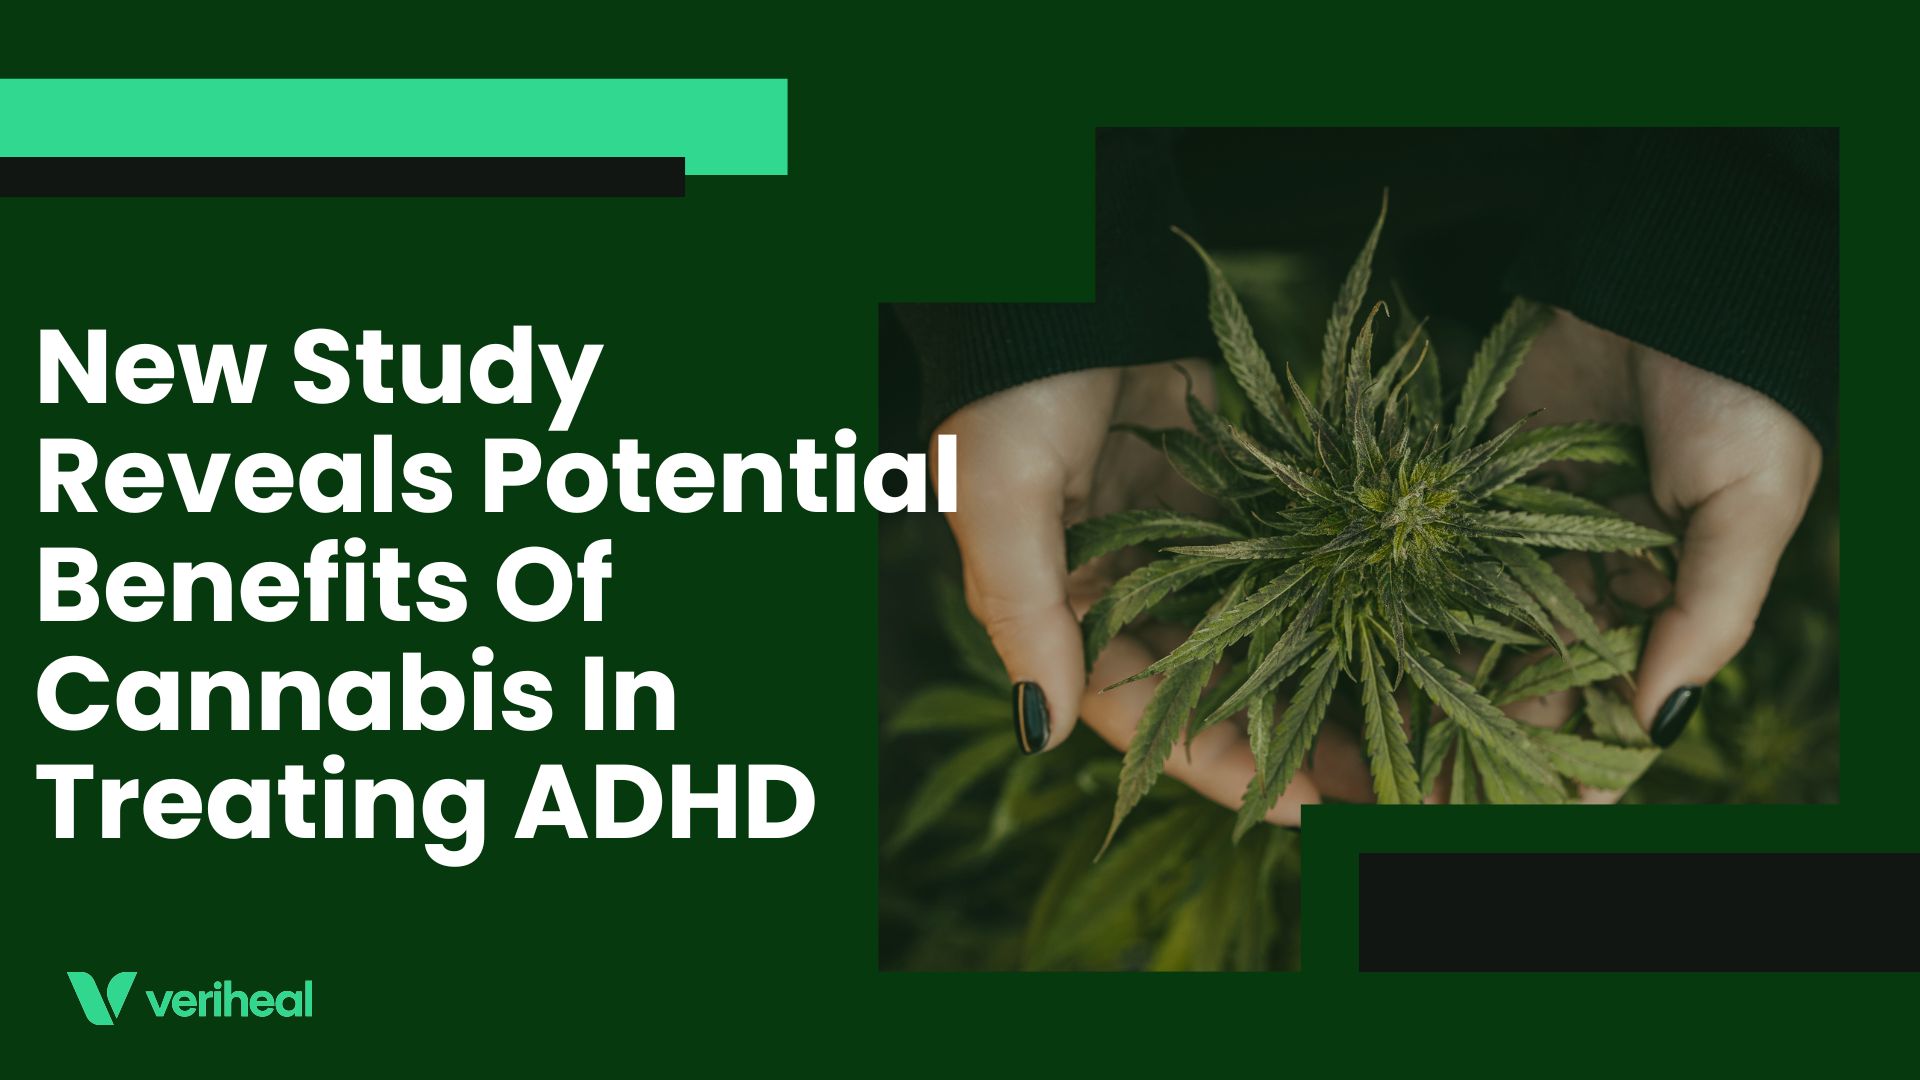 New Study Reveals Potential Benefits Of Cannabis In Treating ADHD